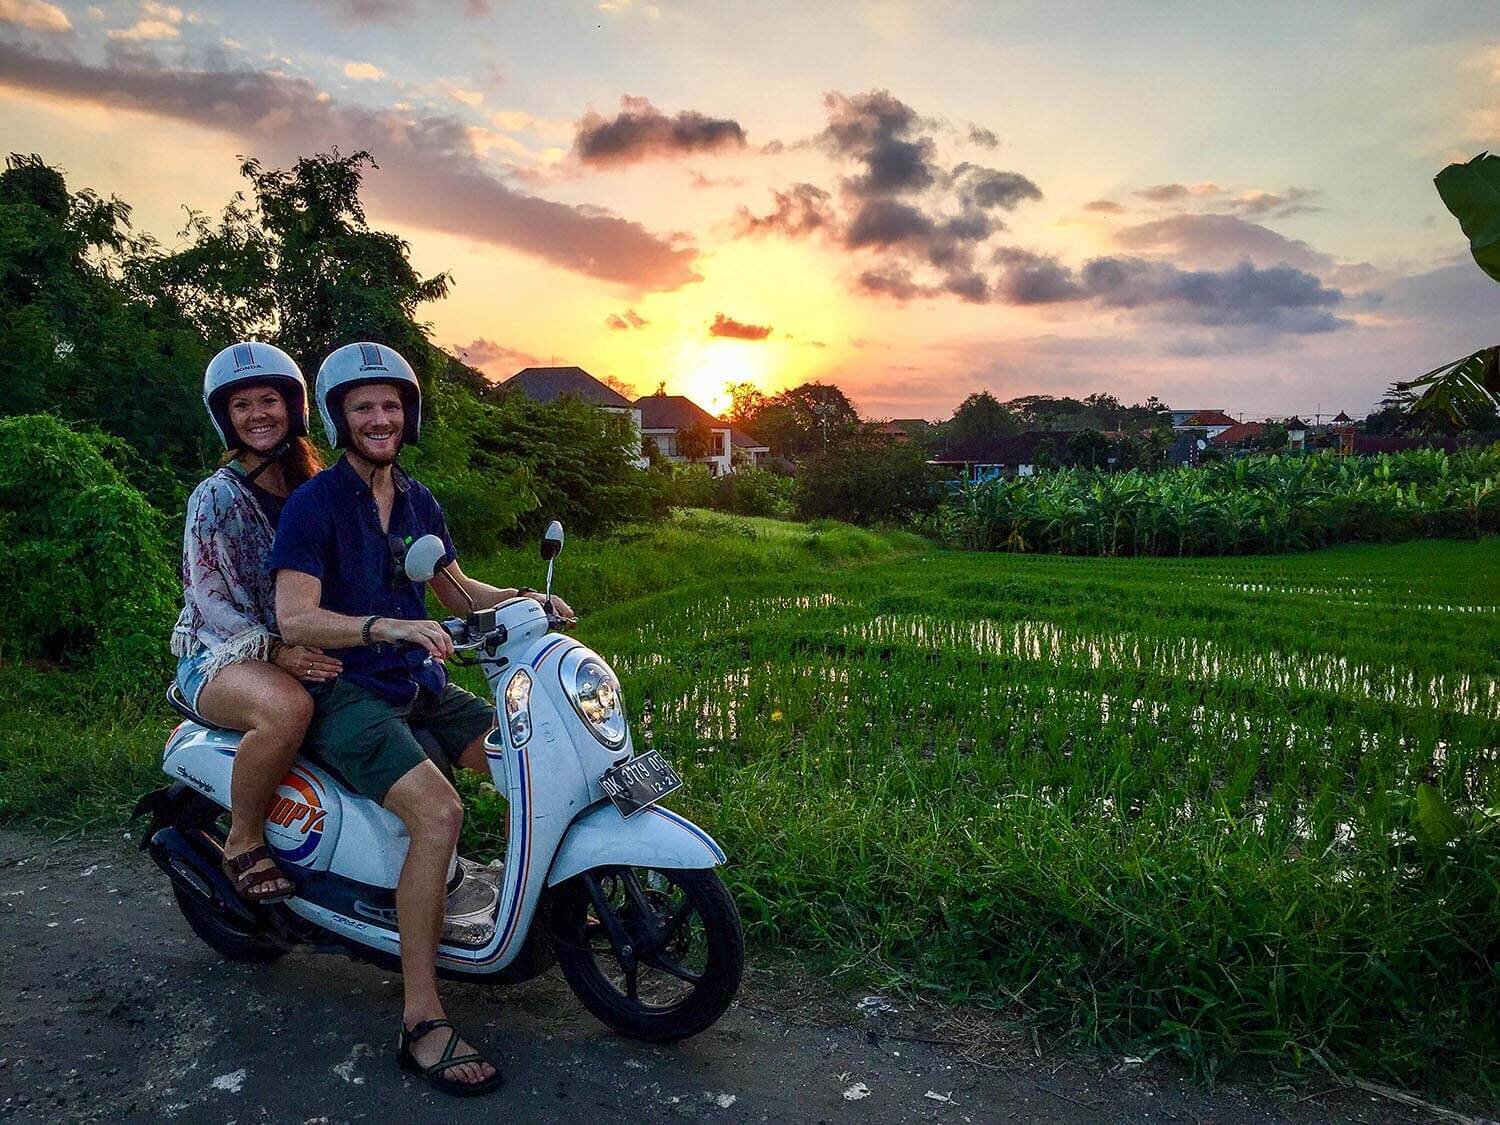 Travel Insurance Comparison - Scooter at sunset in Bali